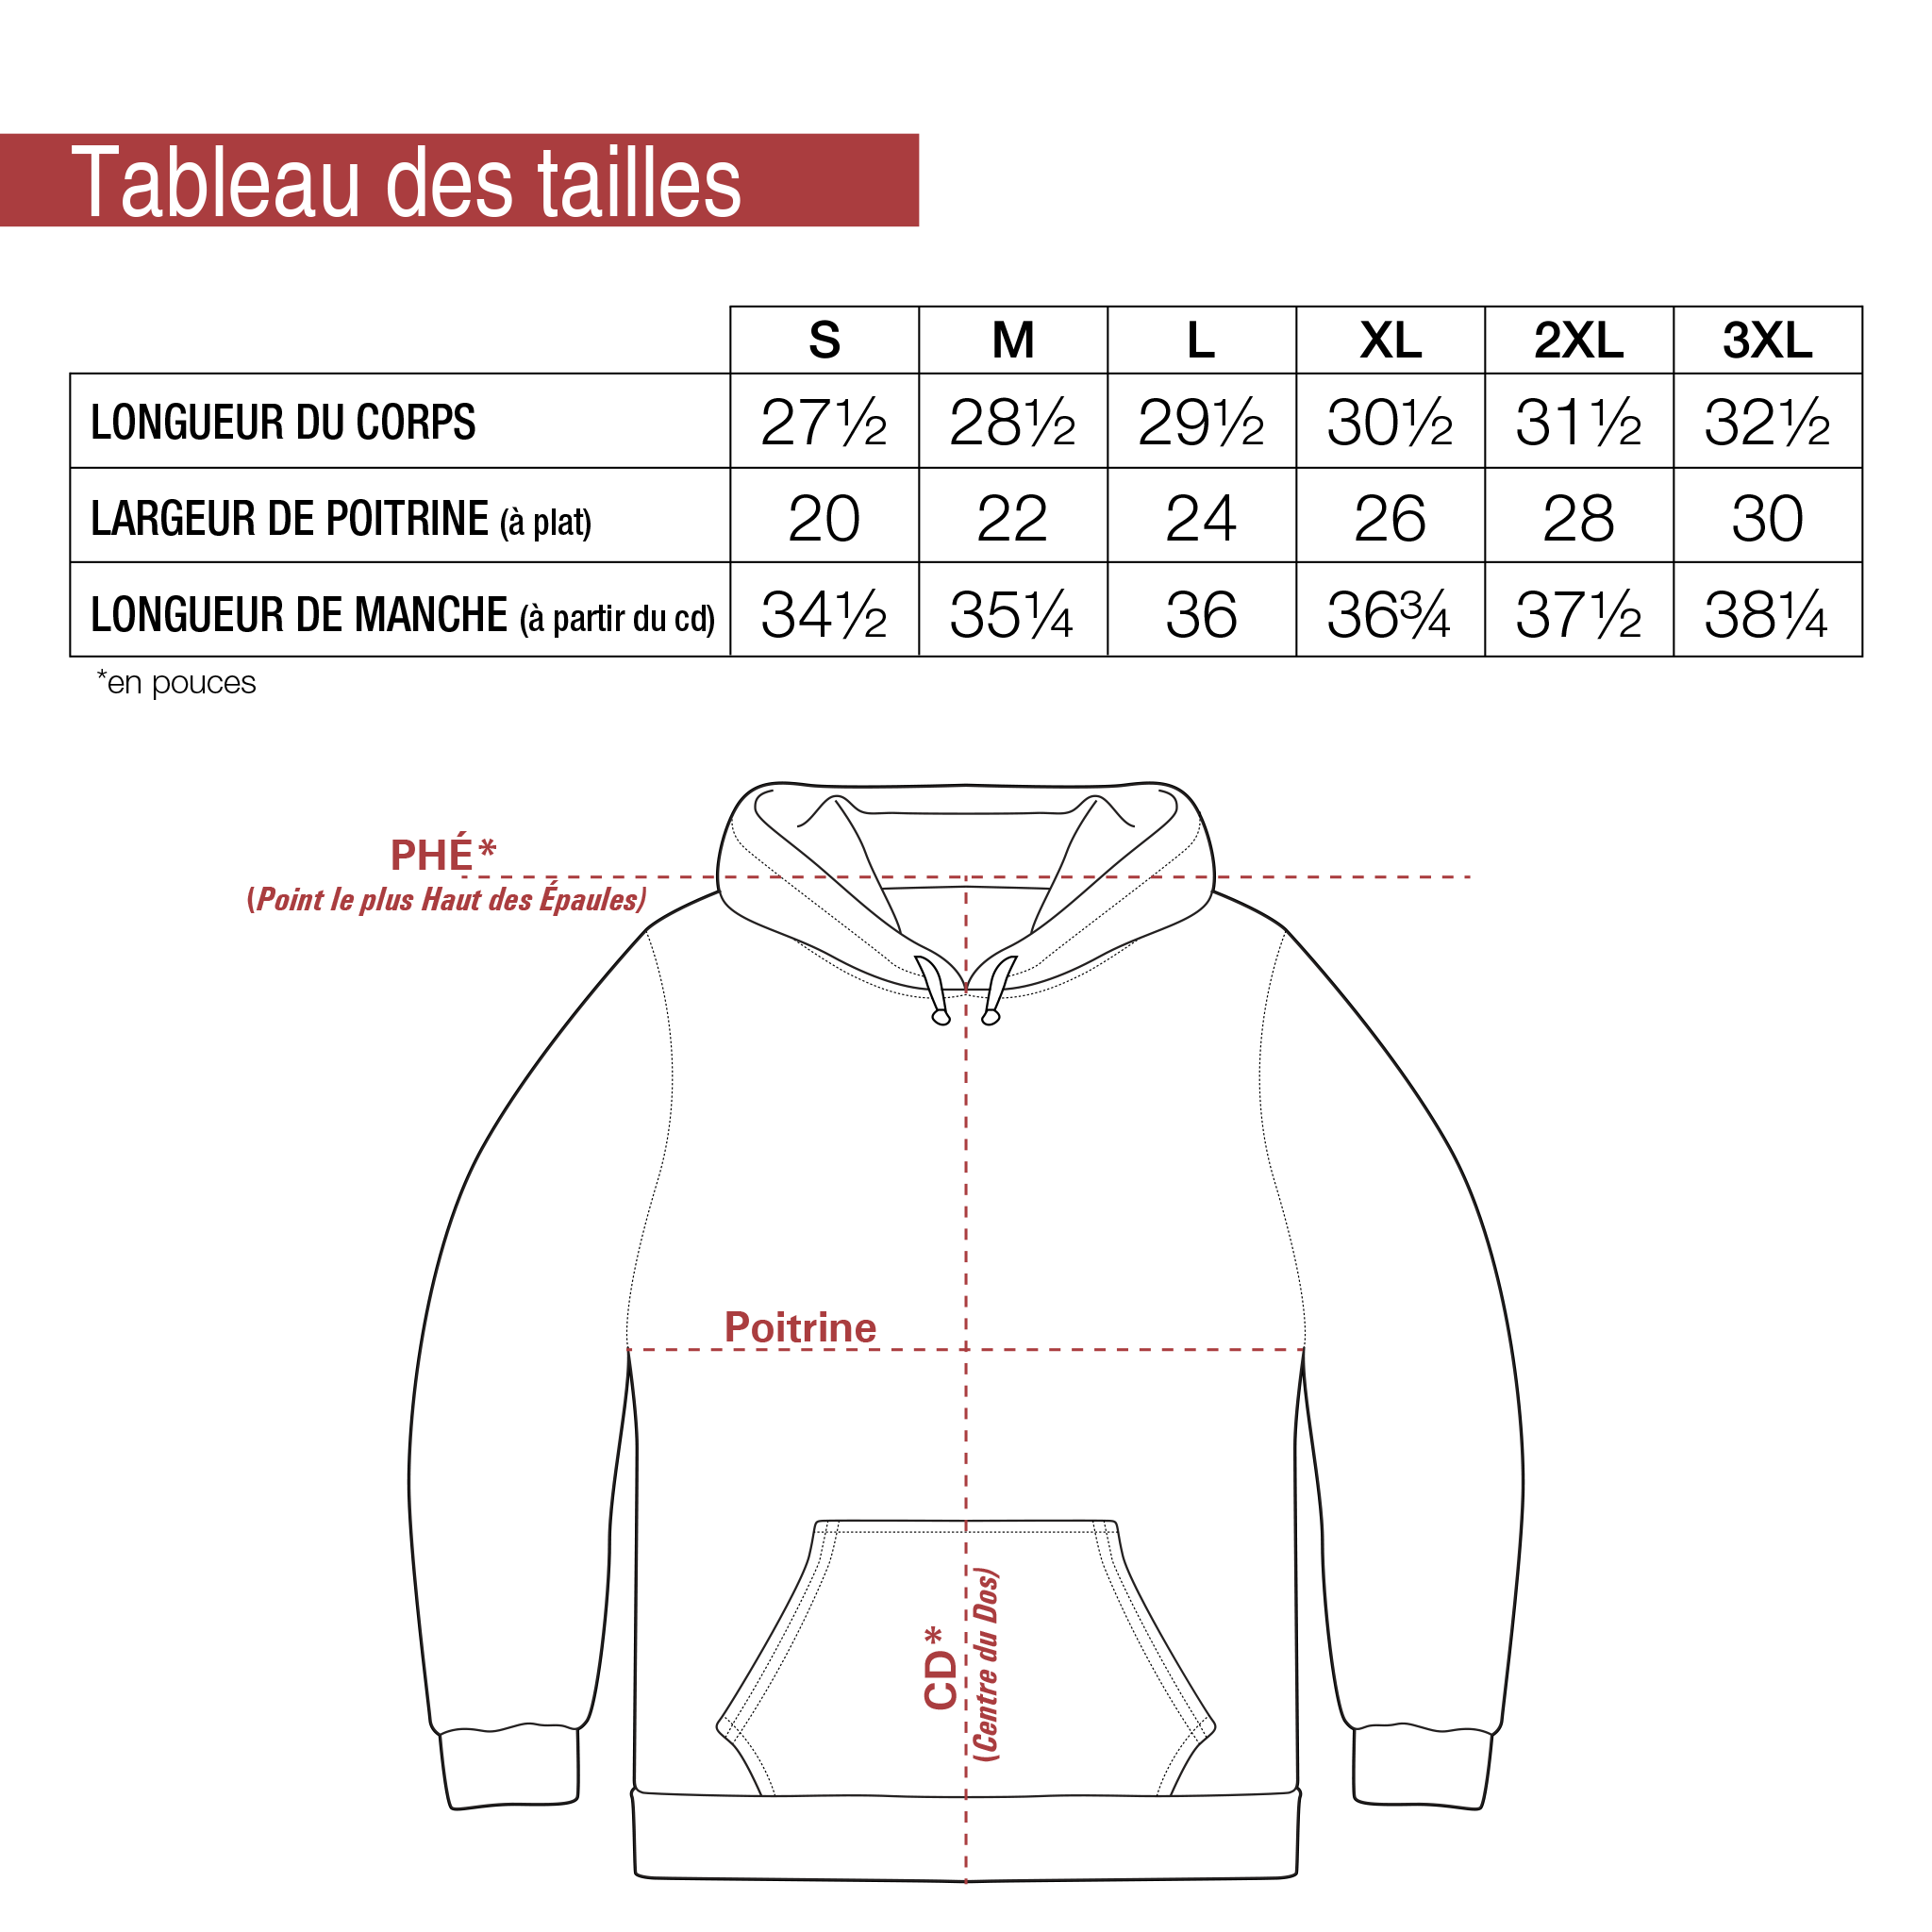 Tableau-taille-ATCF2500_18128f06-60d4-44a2-adc2-9b102fdf83e9.png